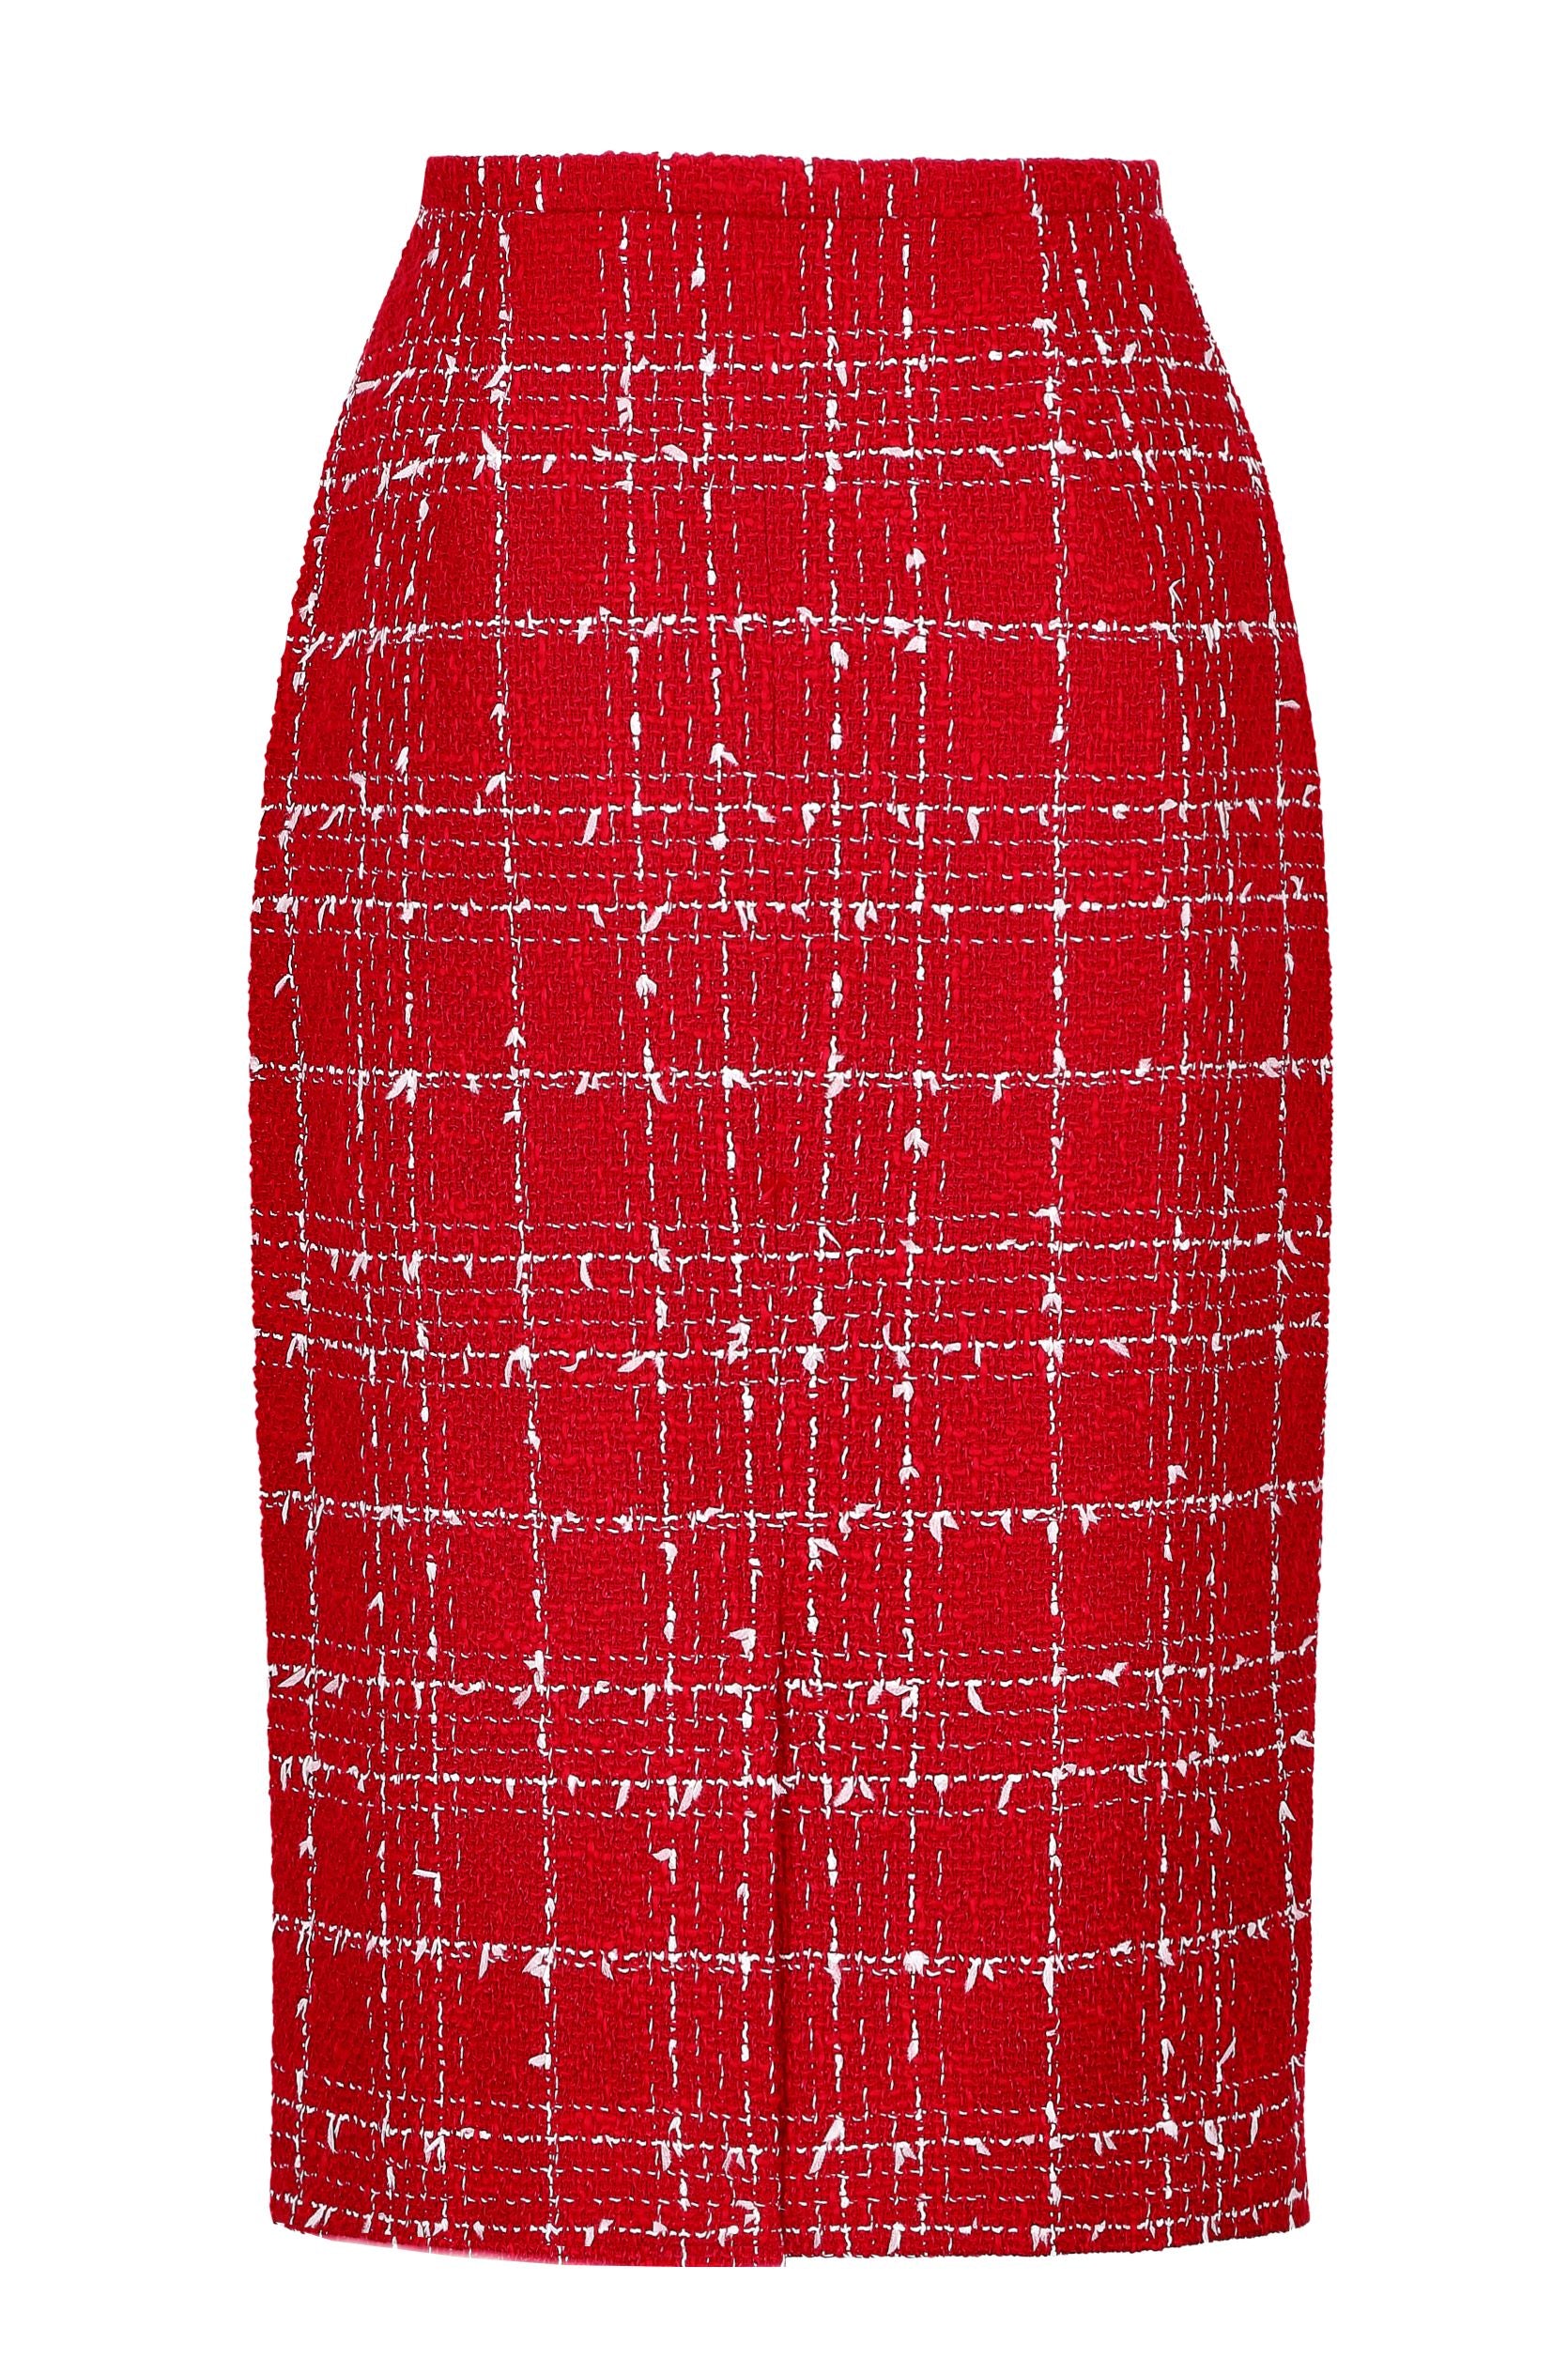 Red/White Check Tweed Skirt - Penny